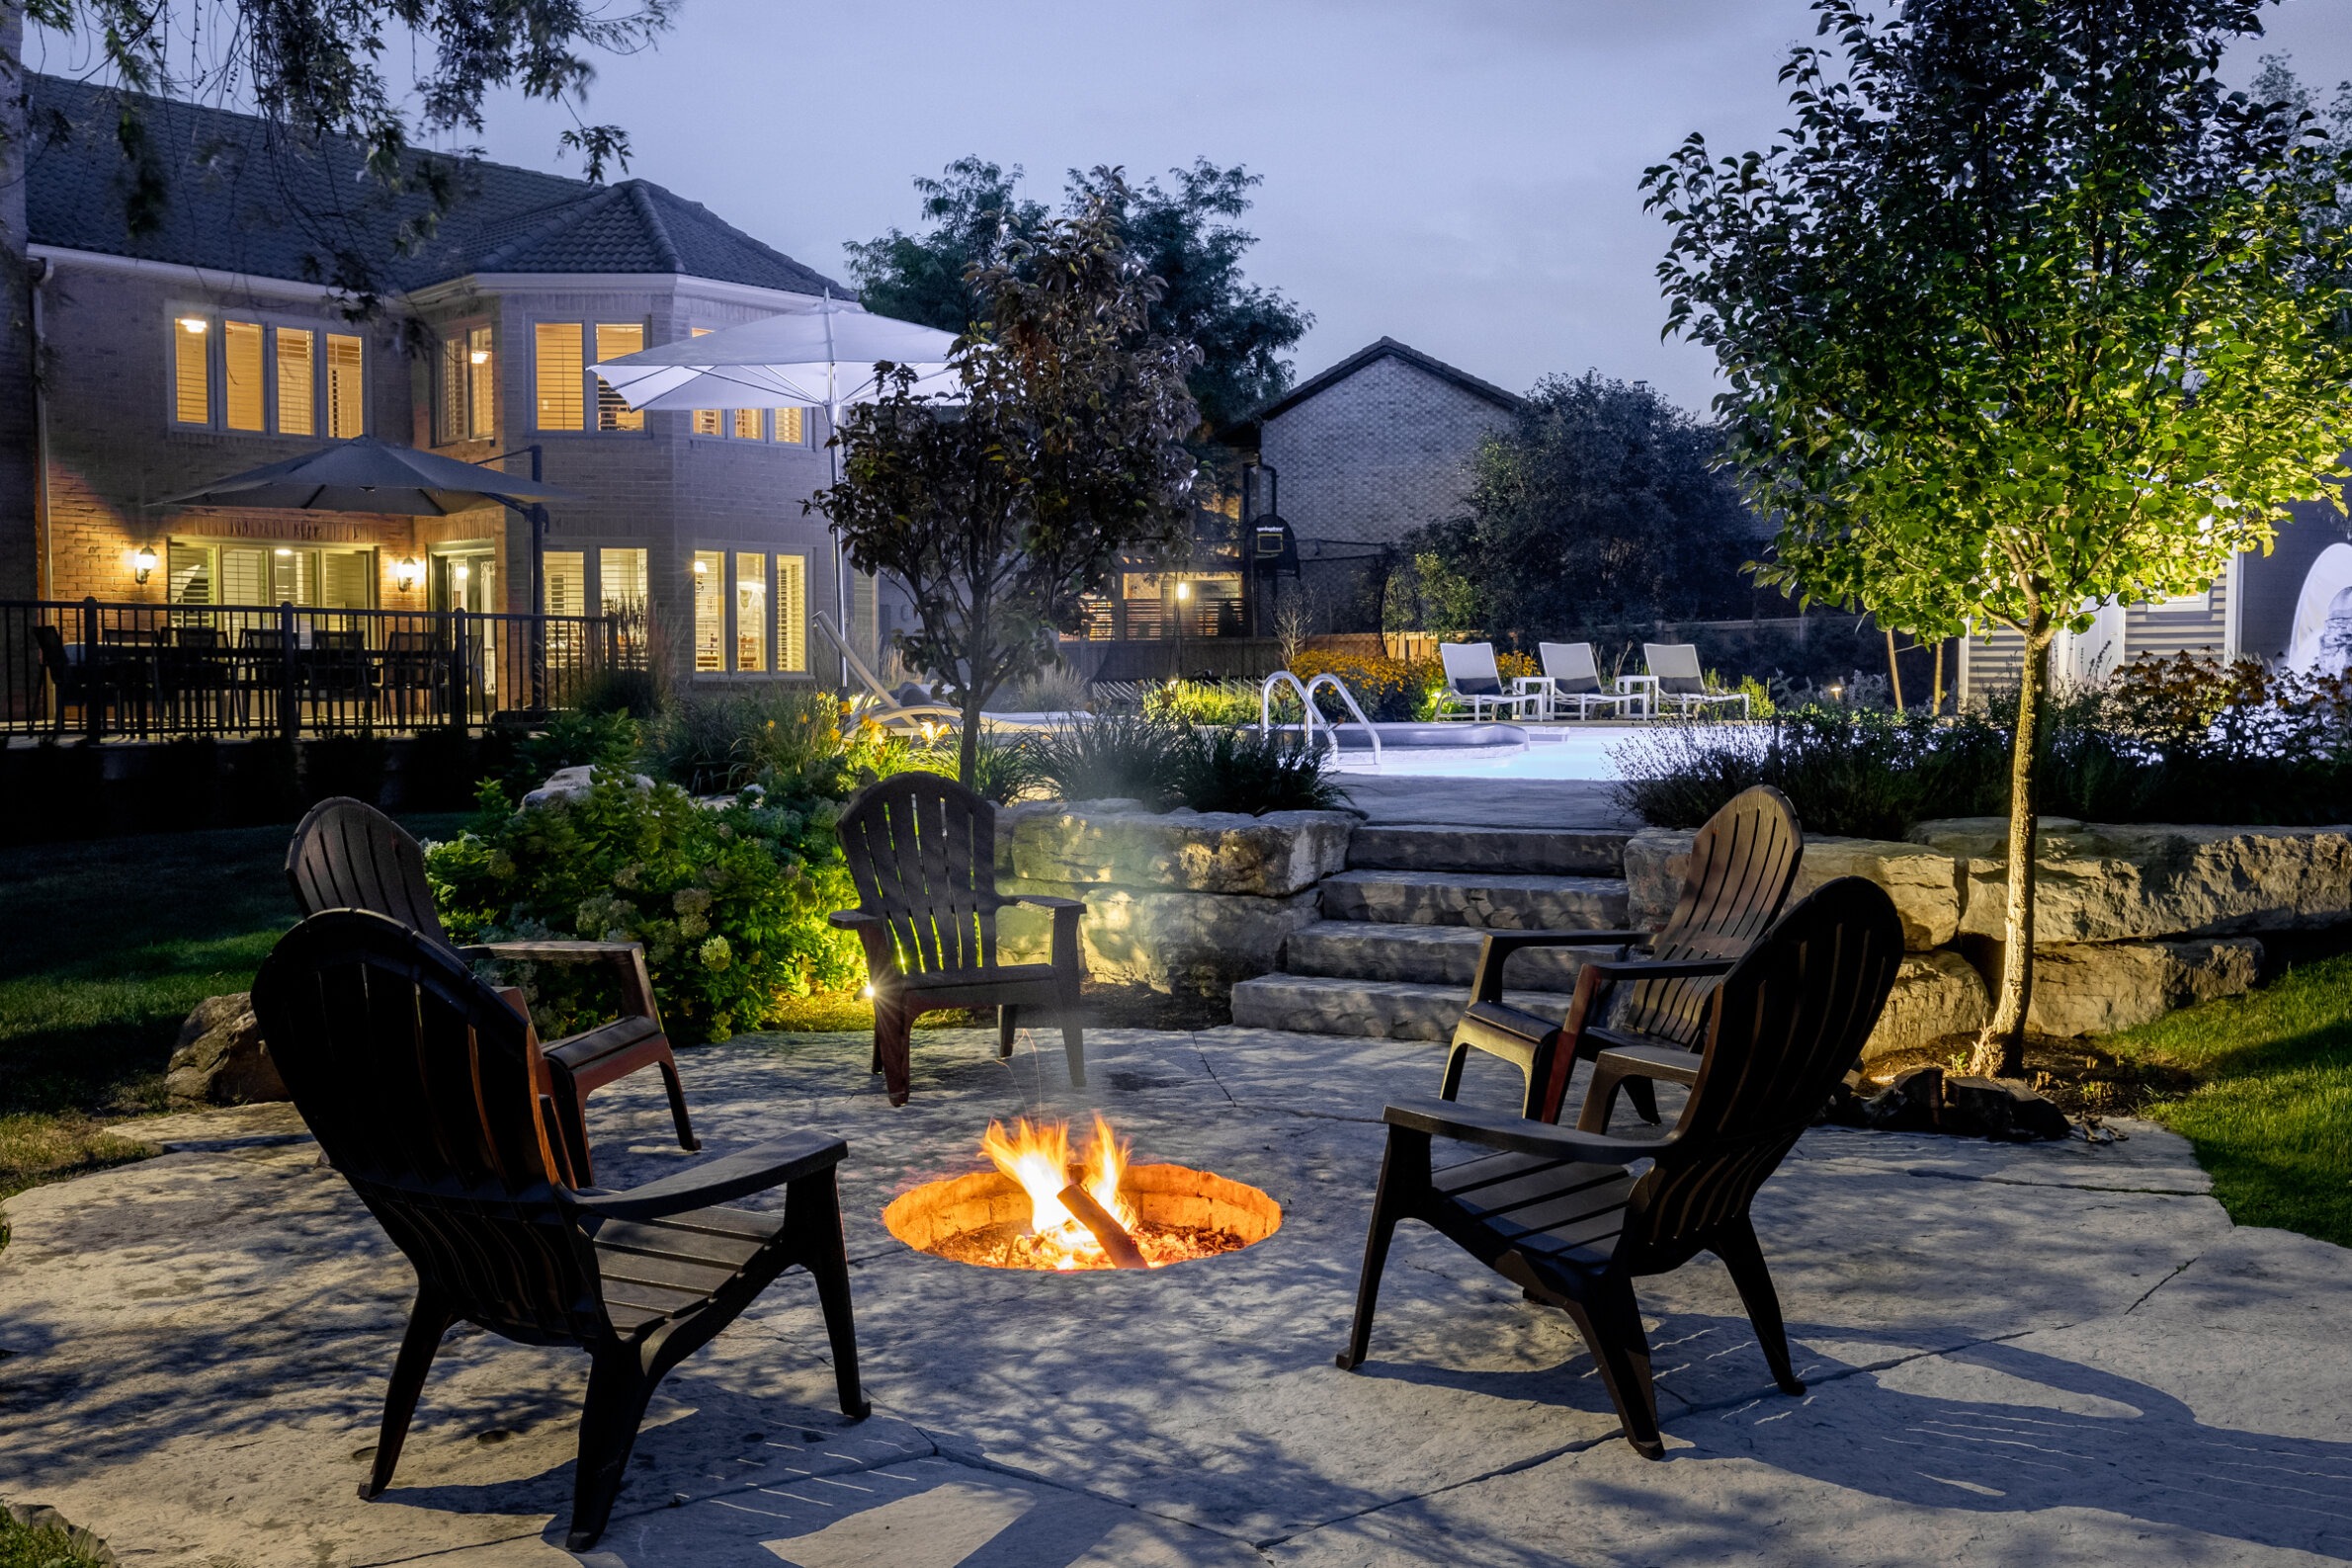 An evening backyard setting with a lit fire pit, Adirondack chairs, a pool, a two-story house with illuminated windows, and surrounding greenery.